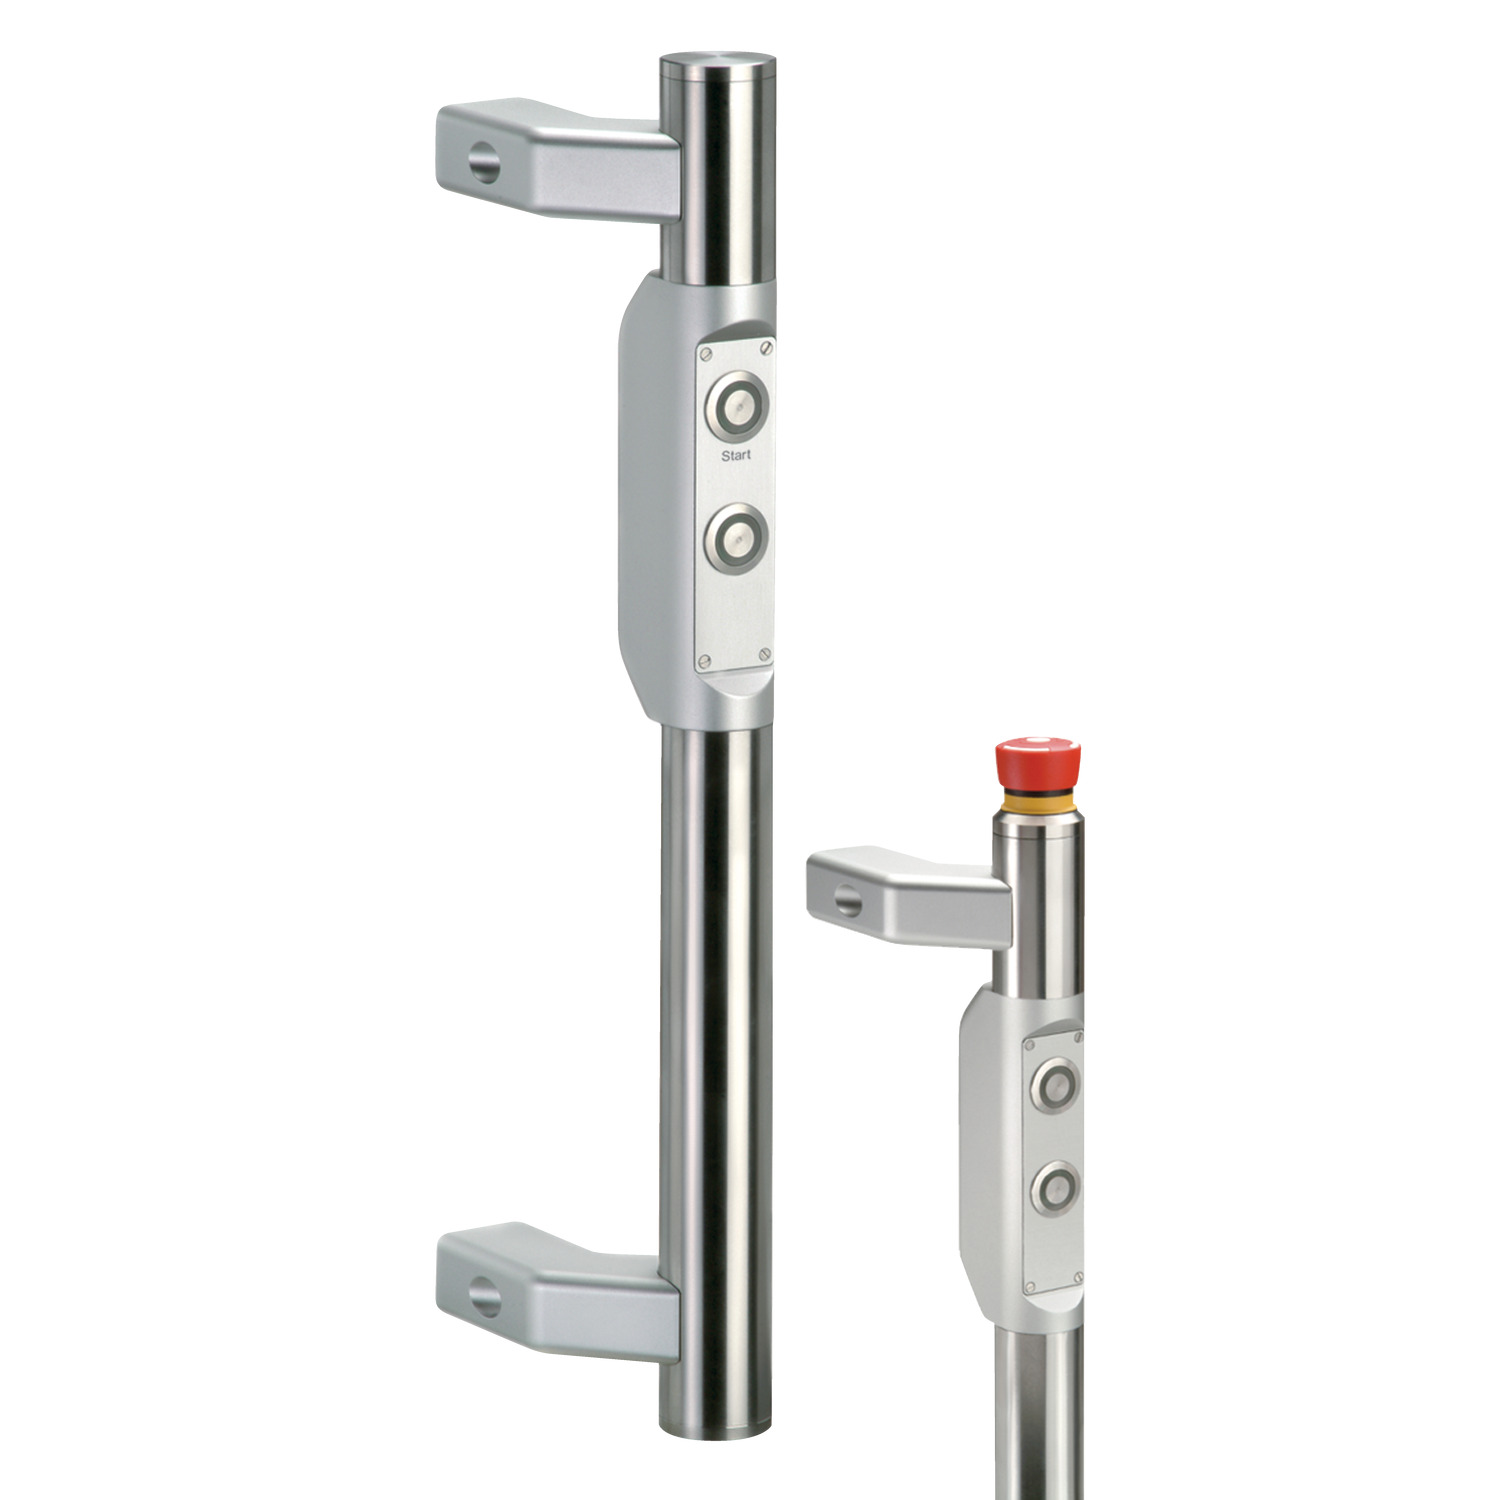 B8120.AC0125 Functional Handle - Electronic Type Three - Left. 2 Push Buttons, 1 Emergency Stop Button - 12-pole (M12 x 1)